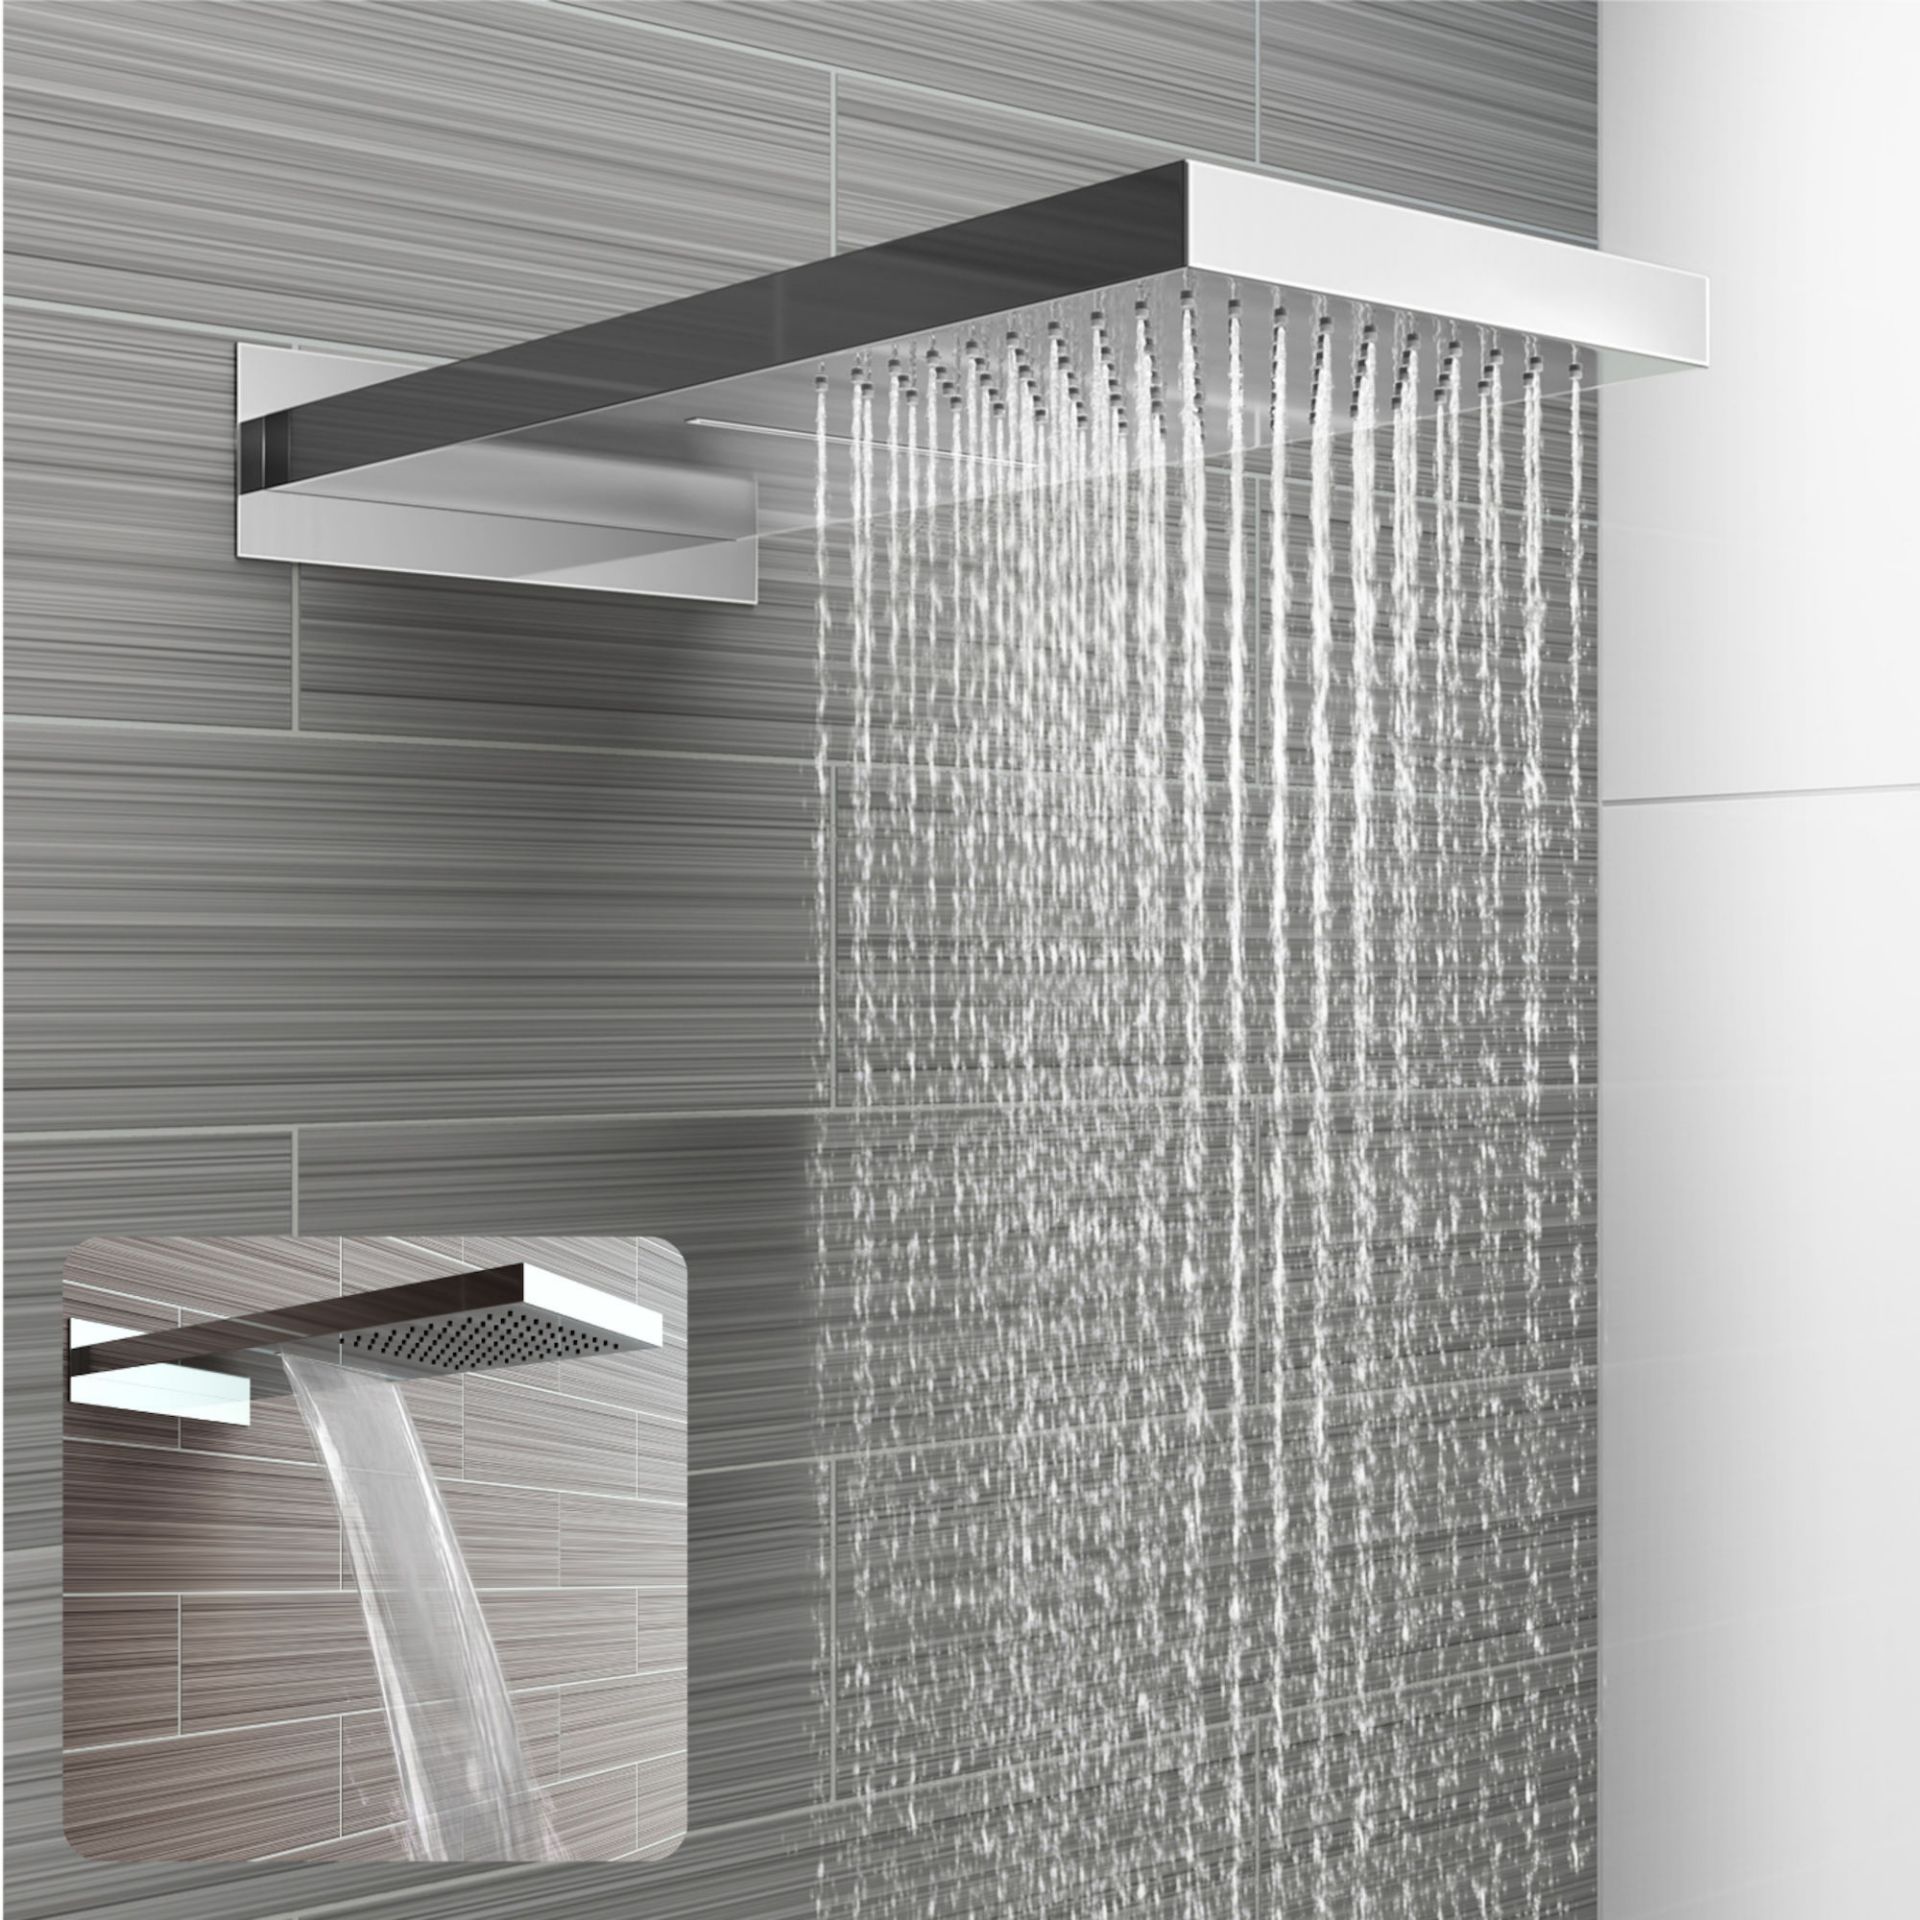 (KL35) Stainless Steel 230x500mm Waterfall Shower Head. RRP £374.98. Dual function waterfall and